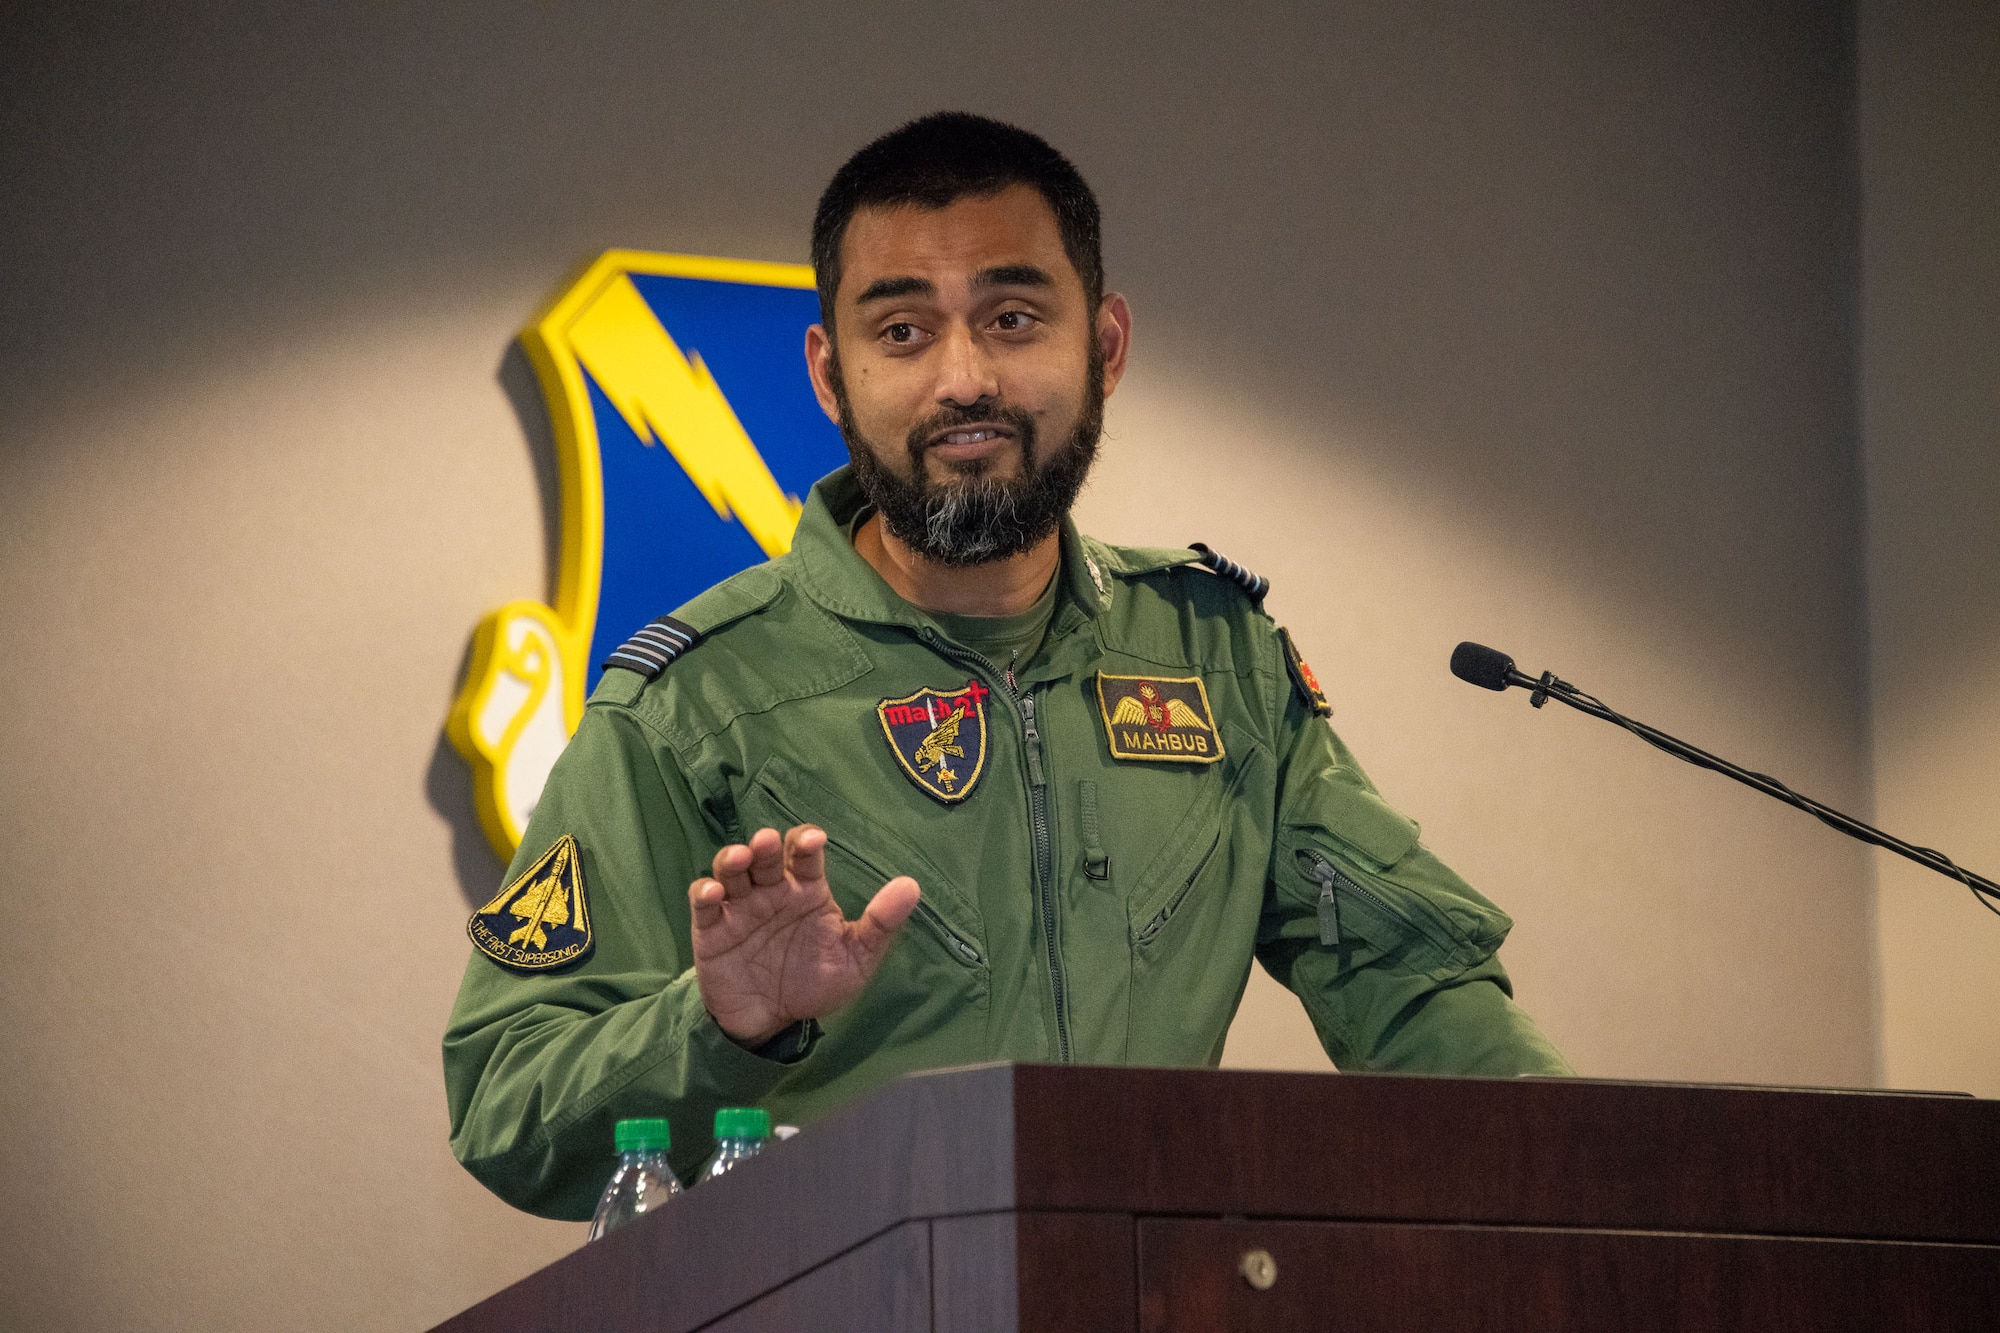 Air Command and Staff College International Officer Class President, Wing Commander Mahbub Ur Rahman from Bangladesh speaks to Alabama Goodwill Ambassador Appreciation event attendees at Husband Auditorium, Maxwell Air Force Base, Alabama, 18, 2021.